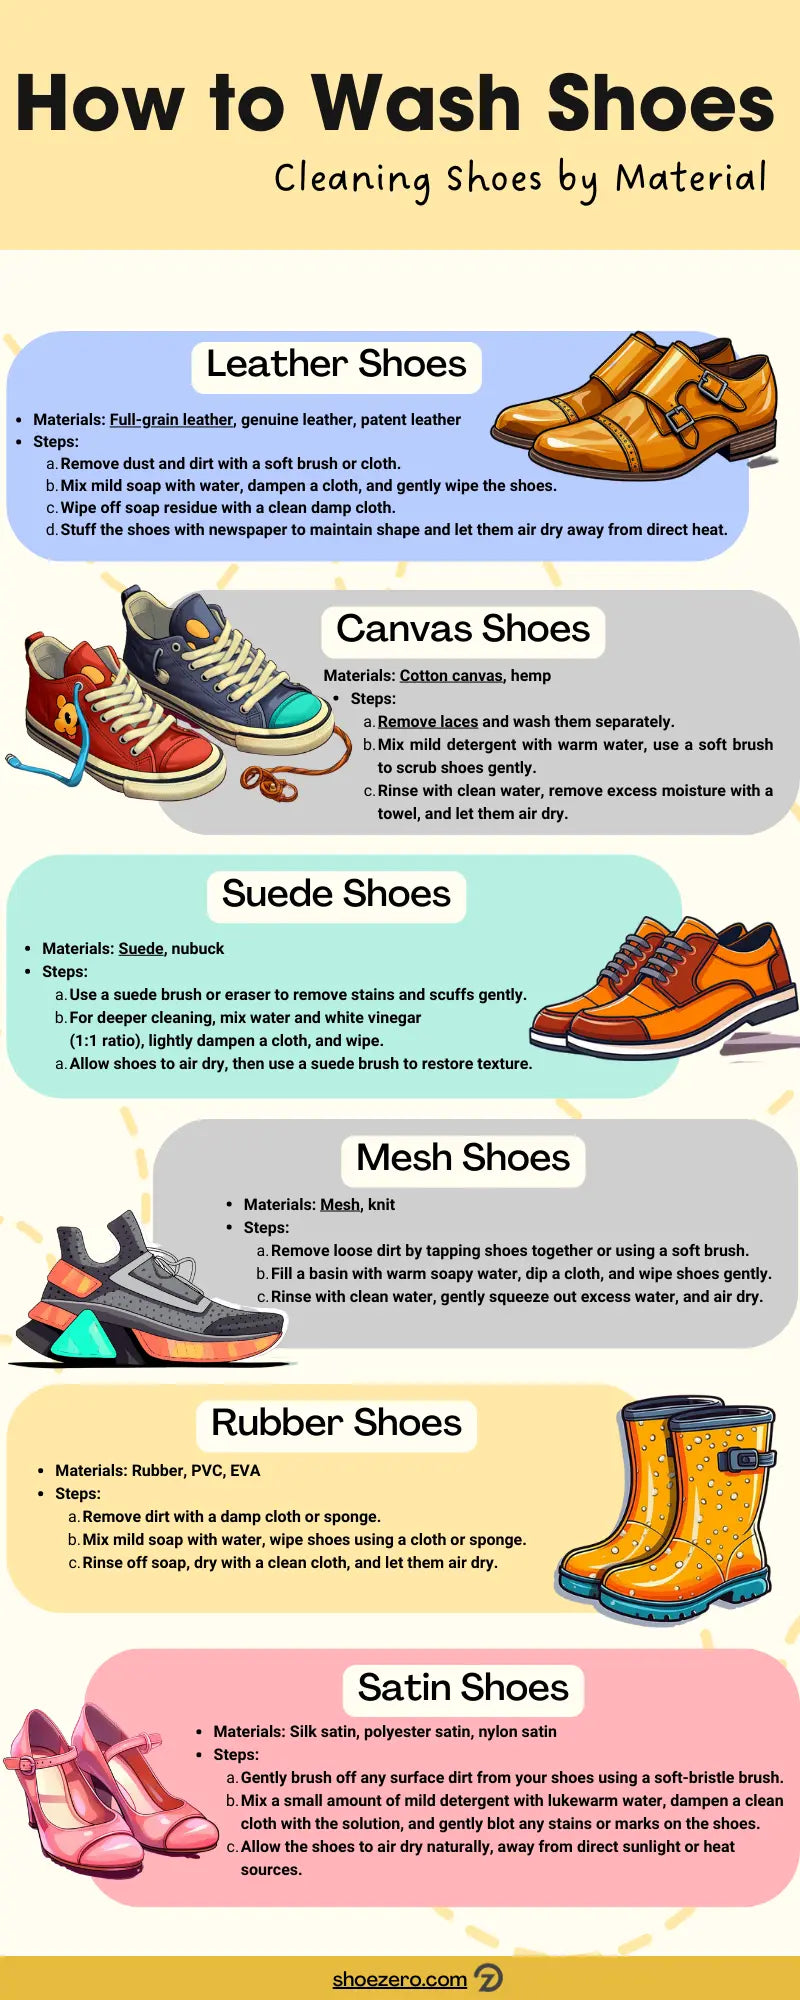 Clean Like a Pro: Homemade Shoe Cleaner DIY Guide